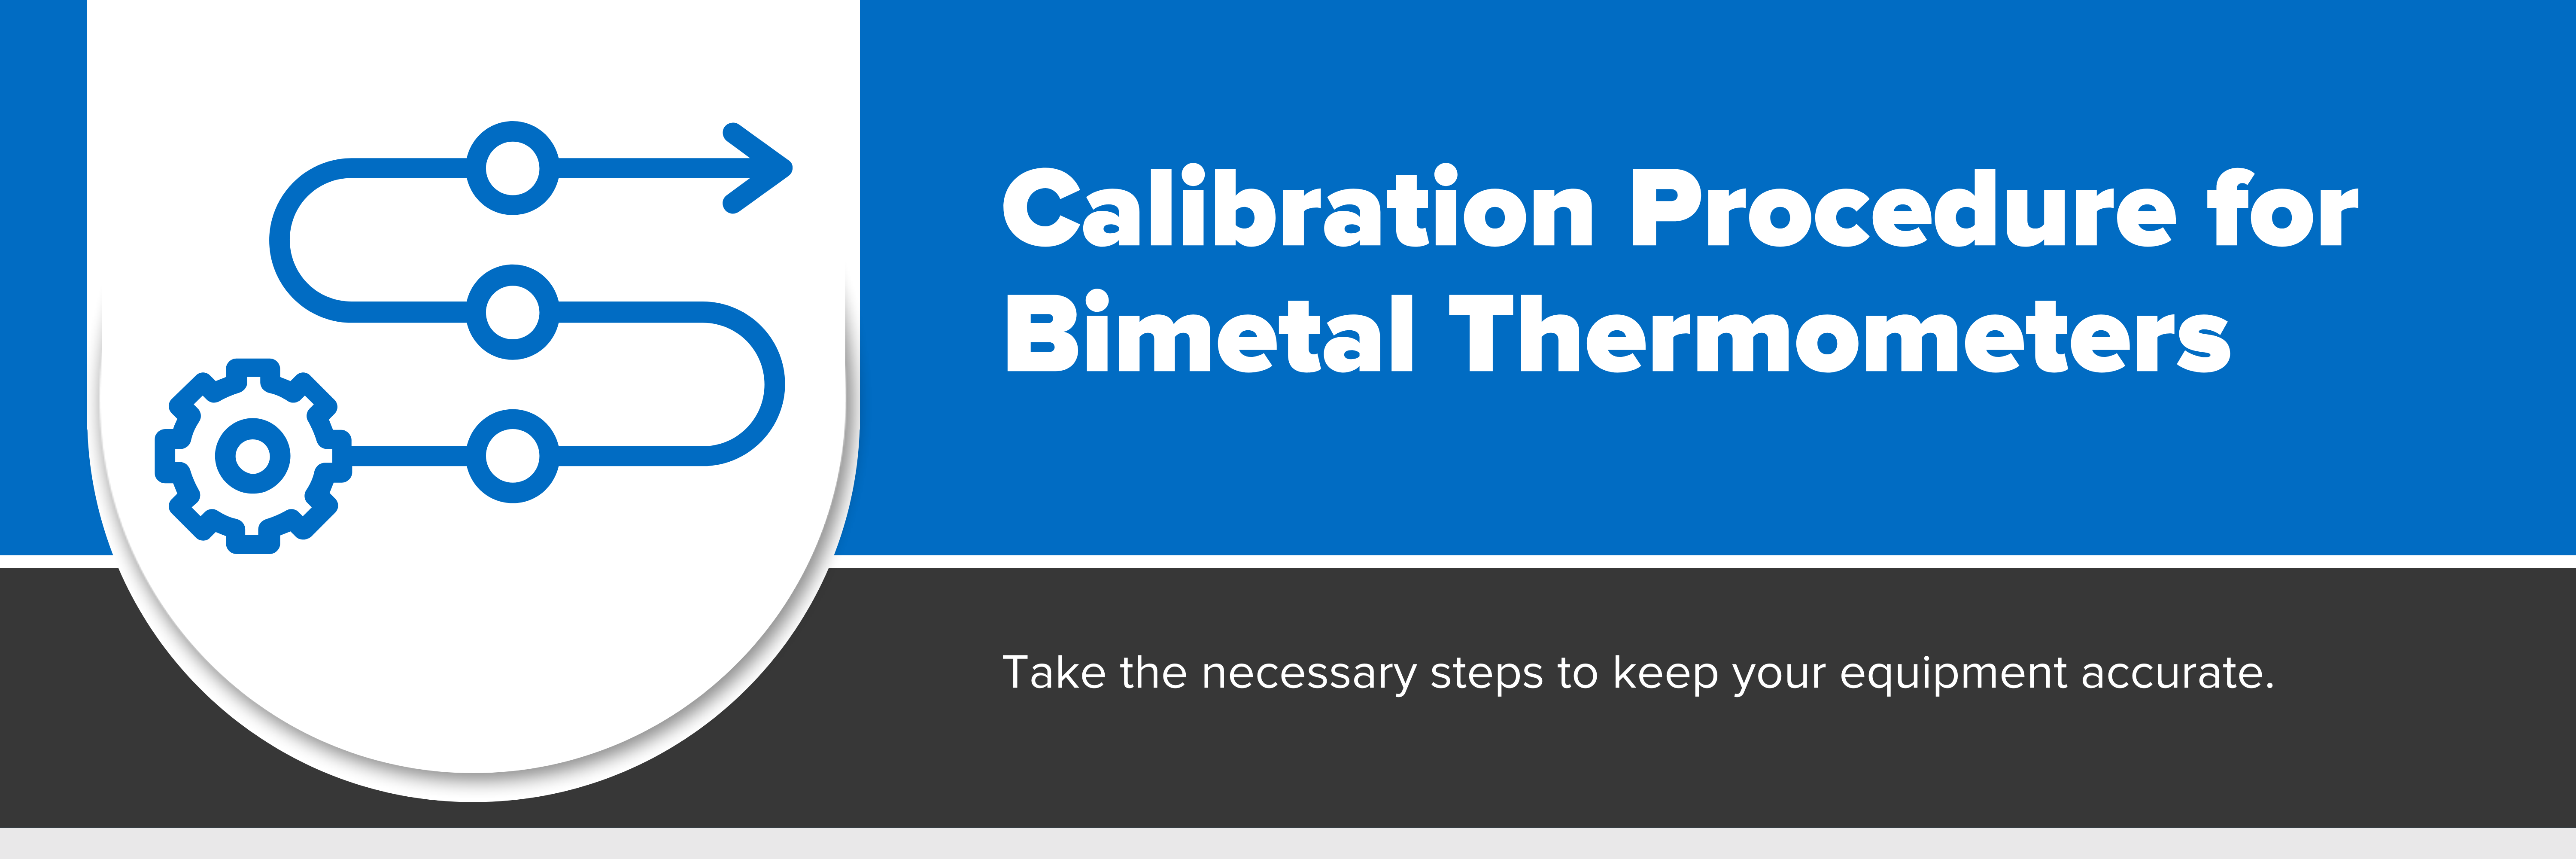 Header image with text "Calibration Procedure for Bimetal Thermometers"